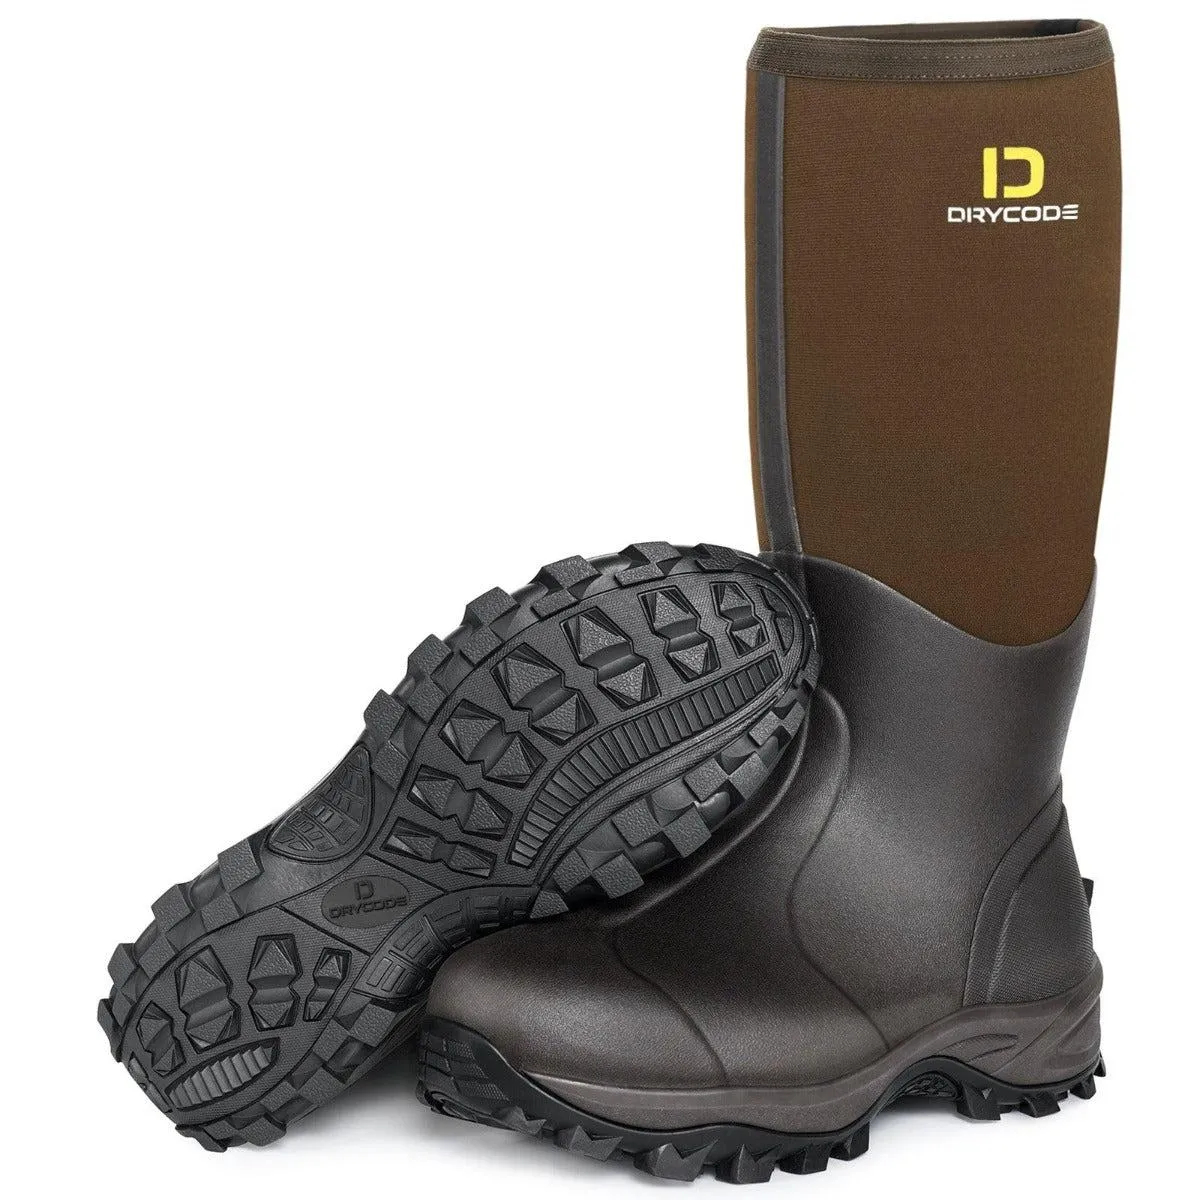 DRYCODE Rubber Boots for Men and Women (Brown), 6mm Warm Neoprene